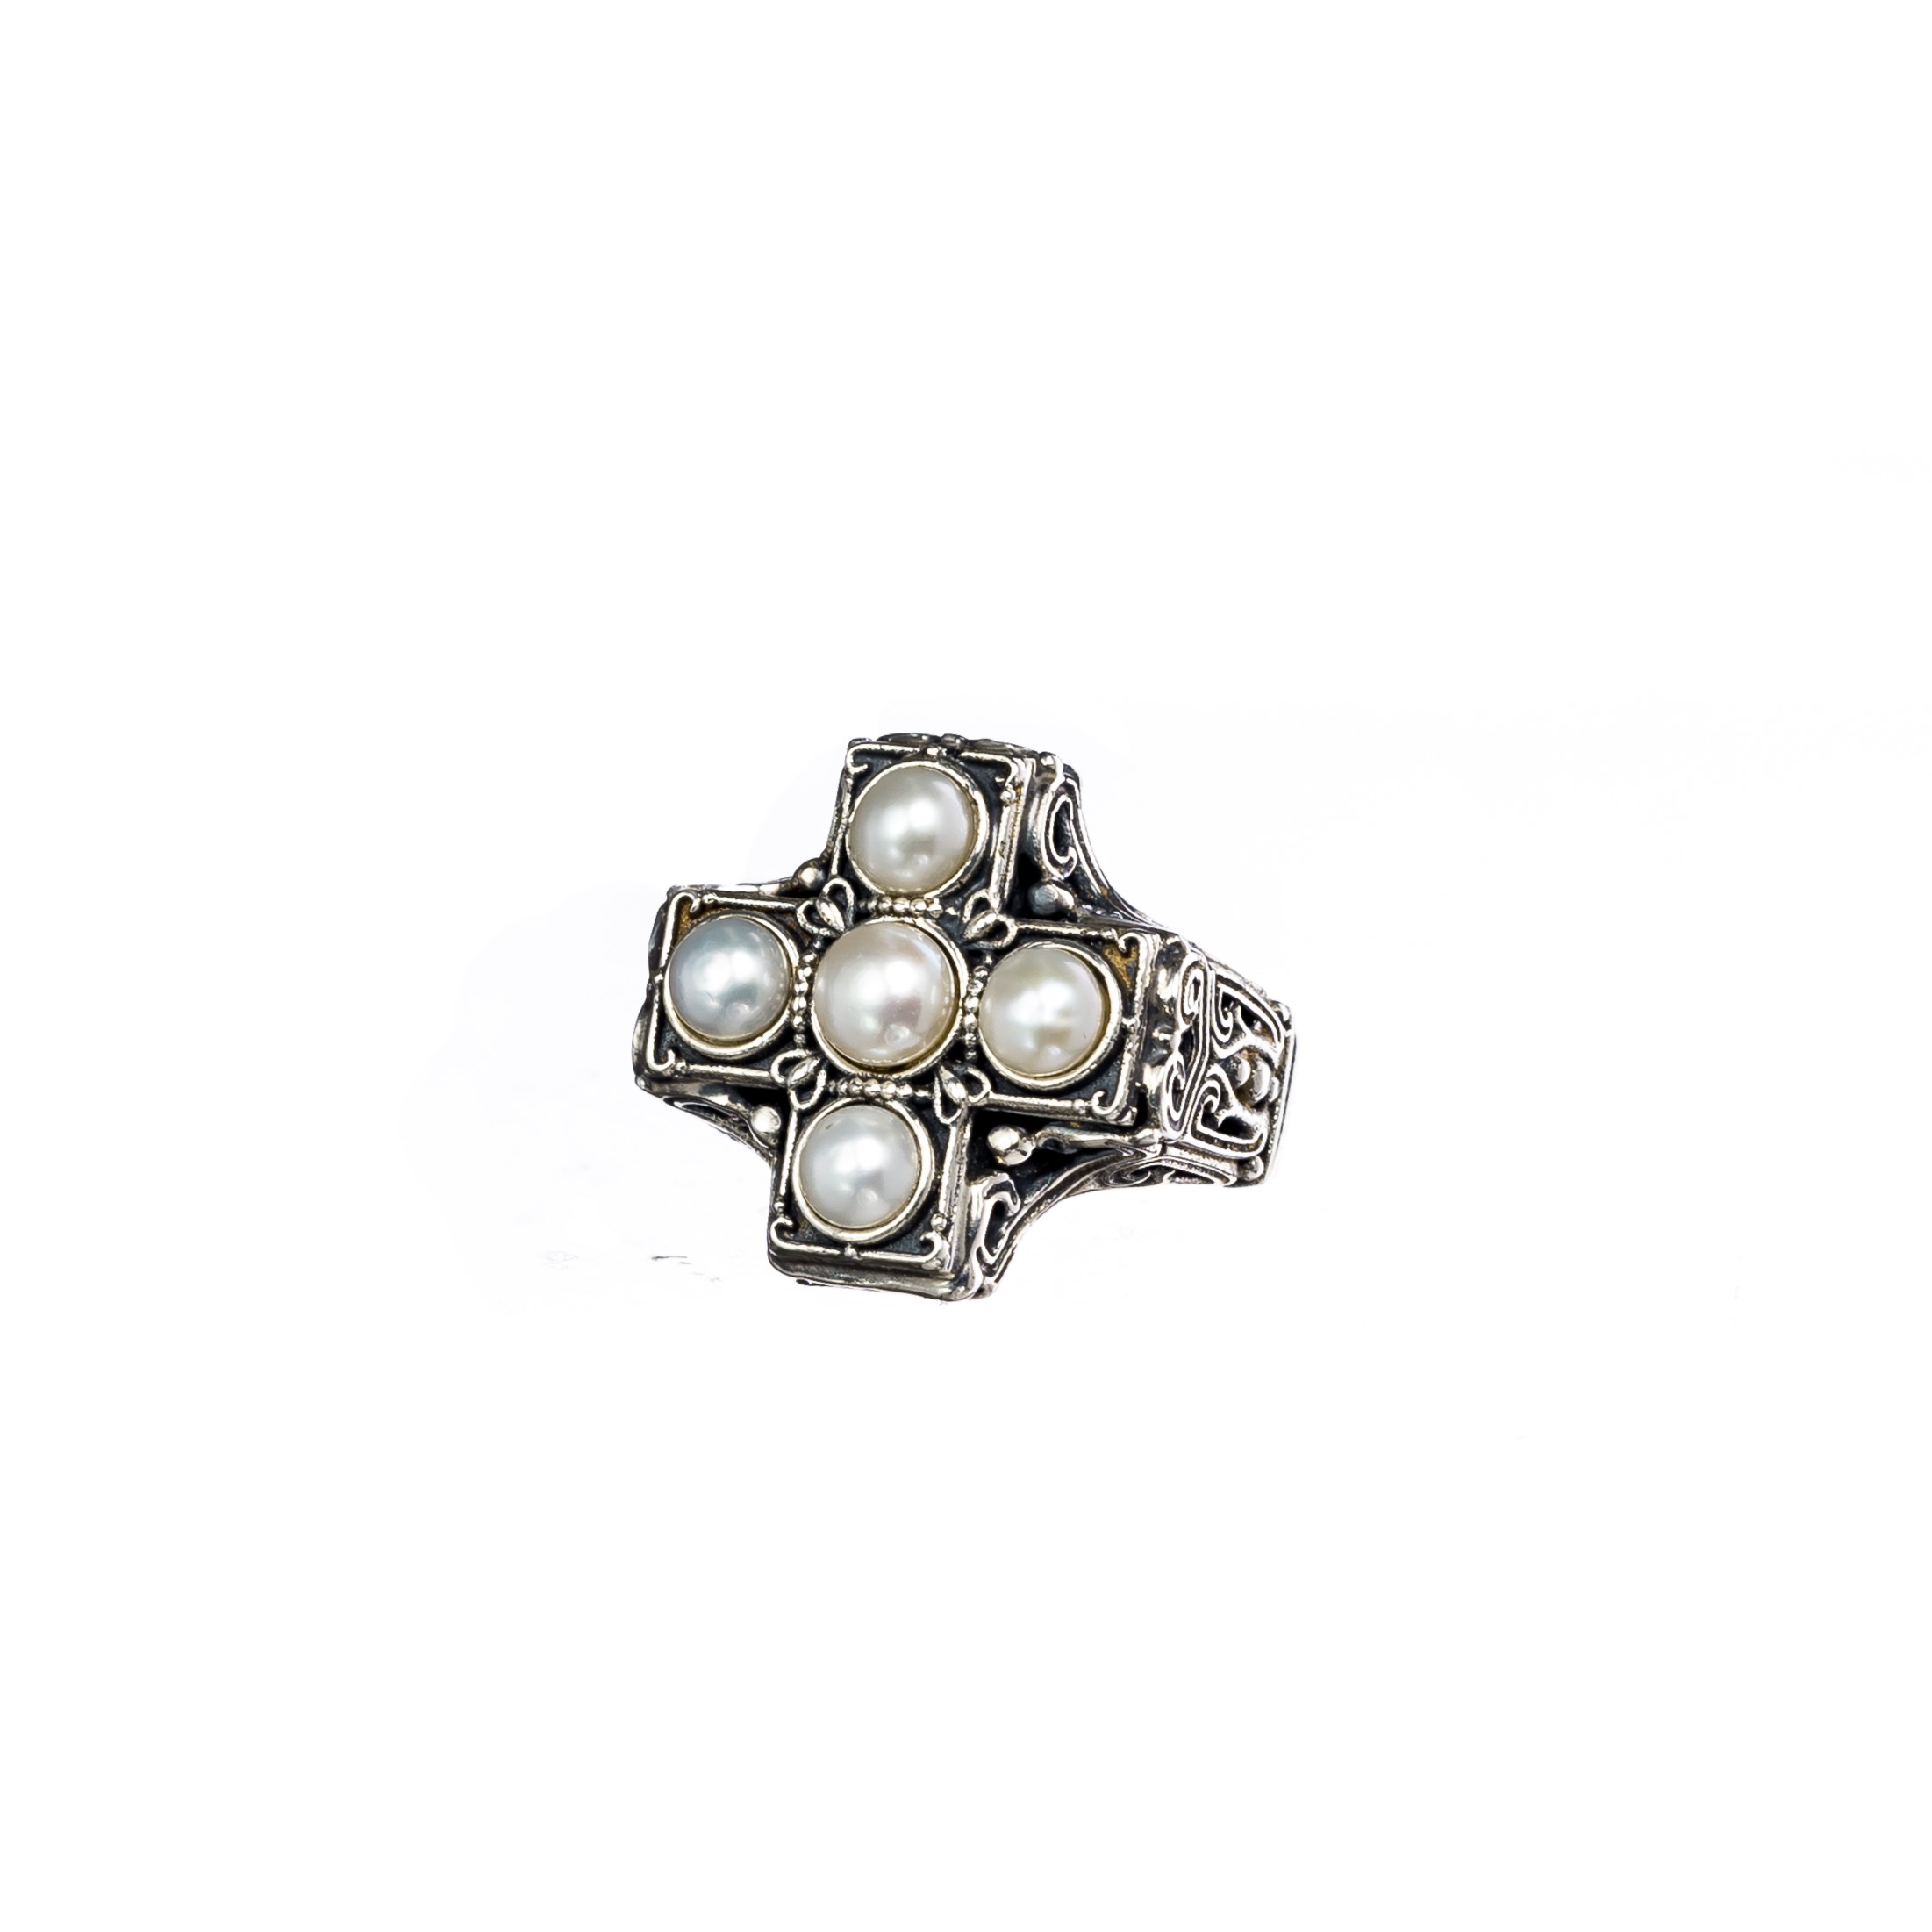 Santorini cross Ring in Sterling Silver with pearls